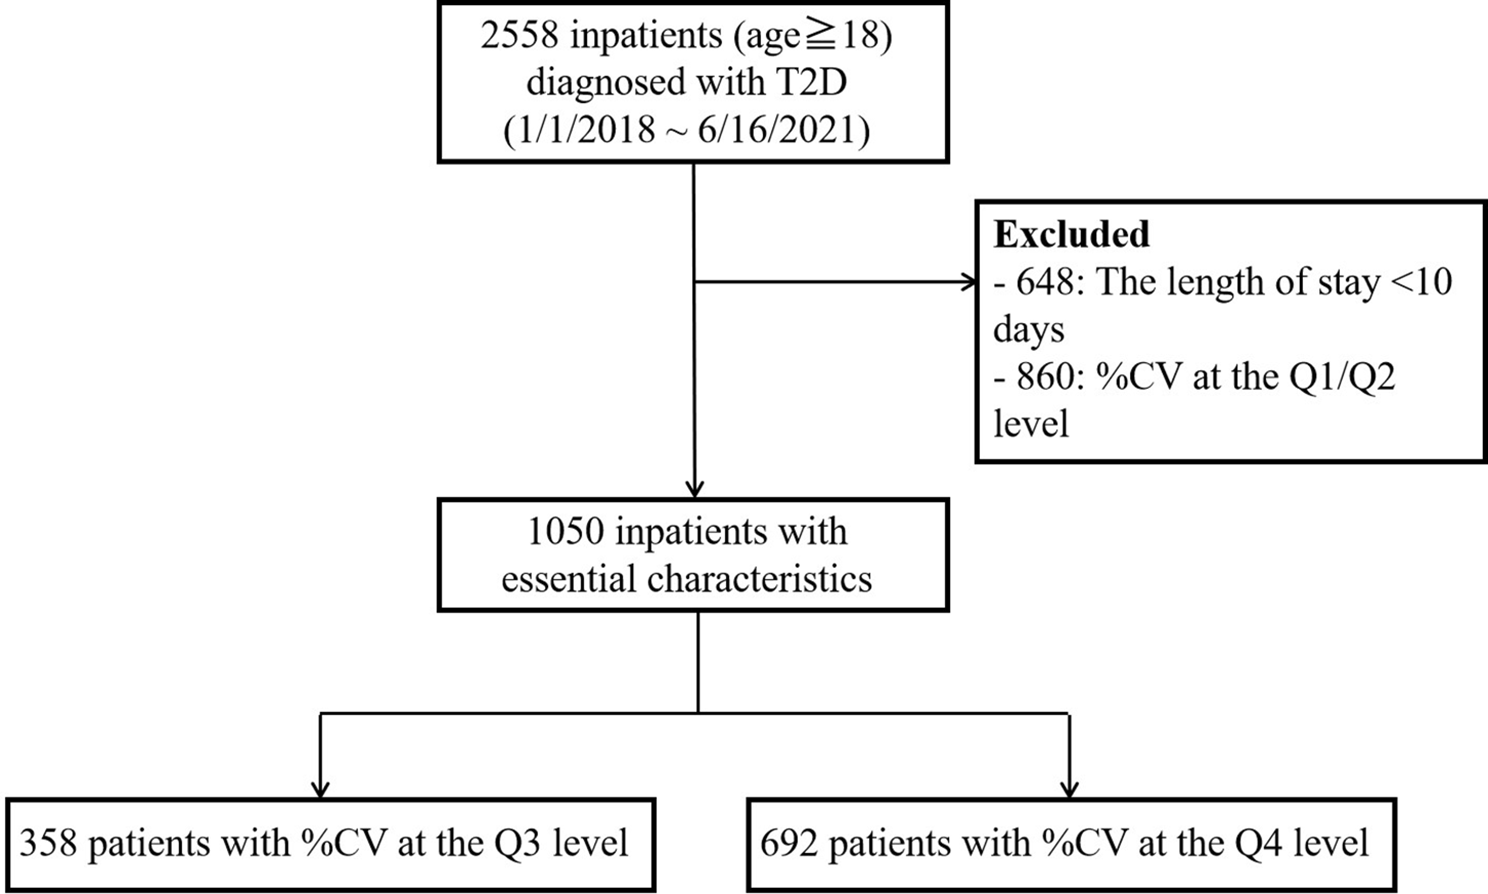 Assessing the temporal within-day glycemic variability during hospitalization in patients with type 2 diabetes patients using continuous glucose monitoring: a retrospective observational study